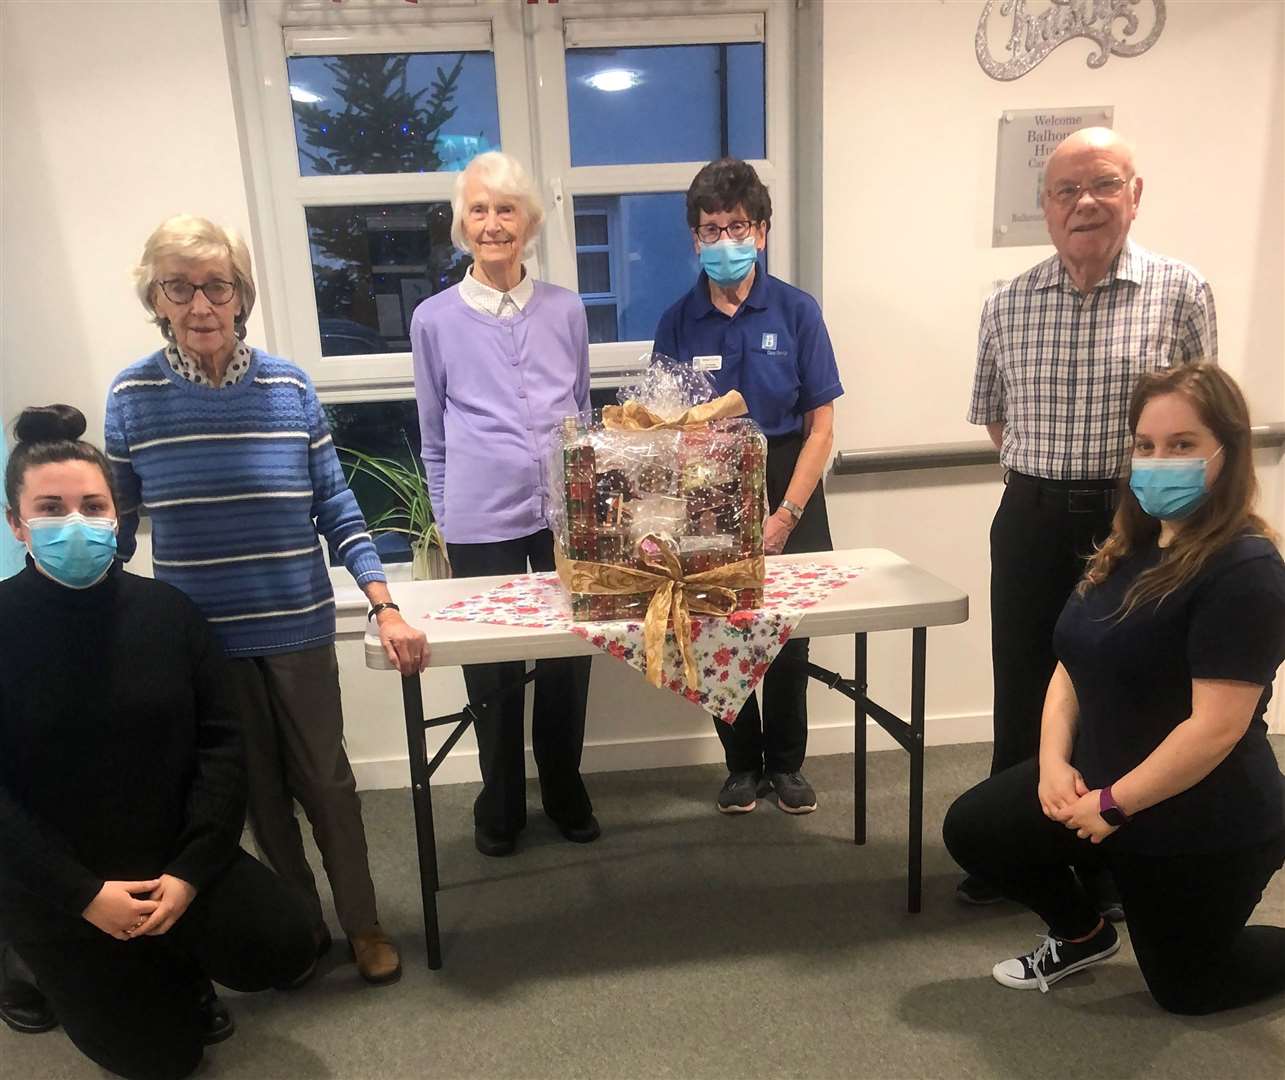 Staff and residents of Balhousie Huntly care home (left to right): Vicky Wink – Activities Coordinator and Carer, Agnes Rae, Jean Mark, Elizabeth Thomson – Domestic assistant, Gordon Ross – resident, and Molly Riddell, Activities Coordinator.